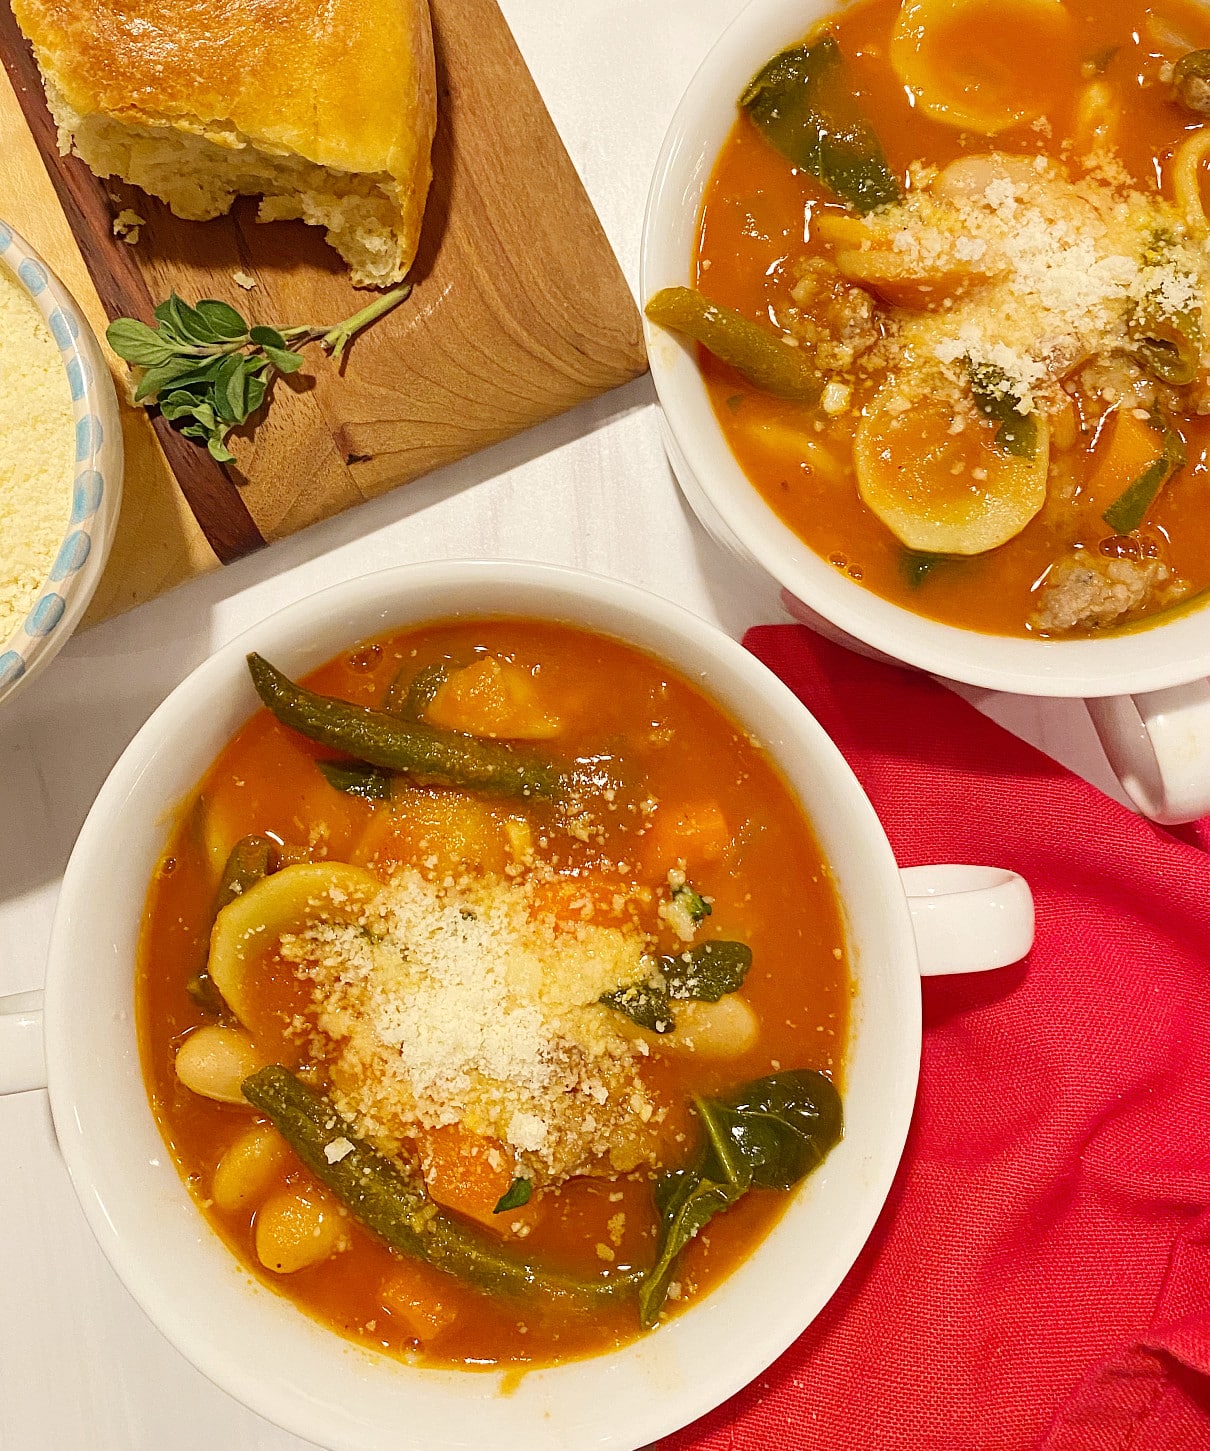 2 bowls of a rich tomato-based minestrone soup that is flavored with Italian sausage sitting on a marble counter. A wooden board with crusty rolls and a dish of grated parmeasan cheese is in the background.